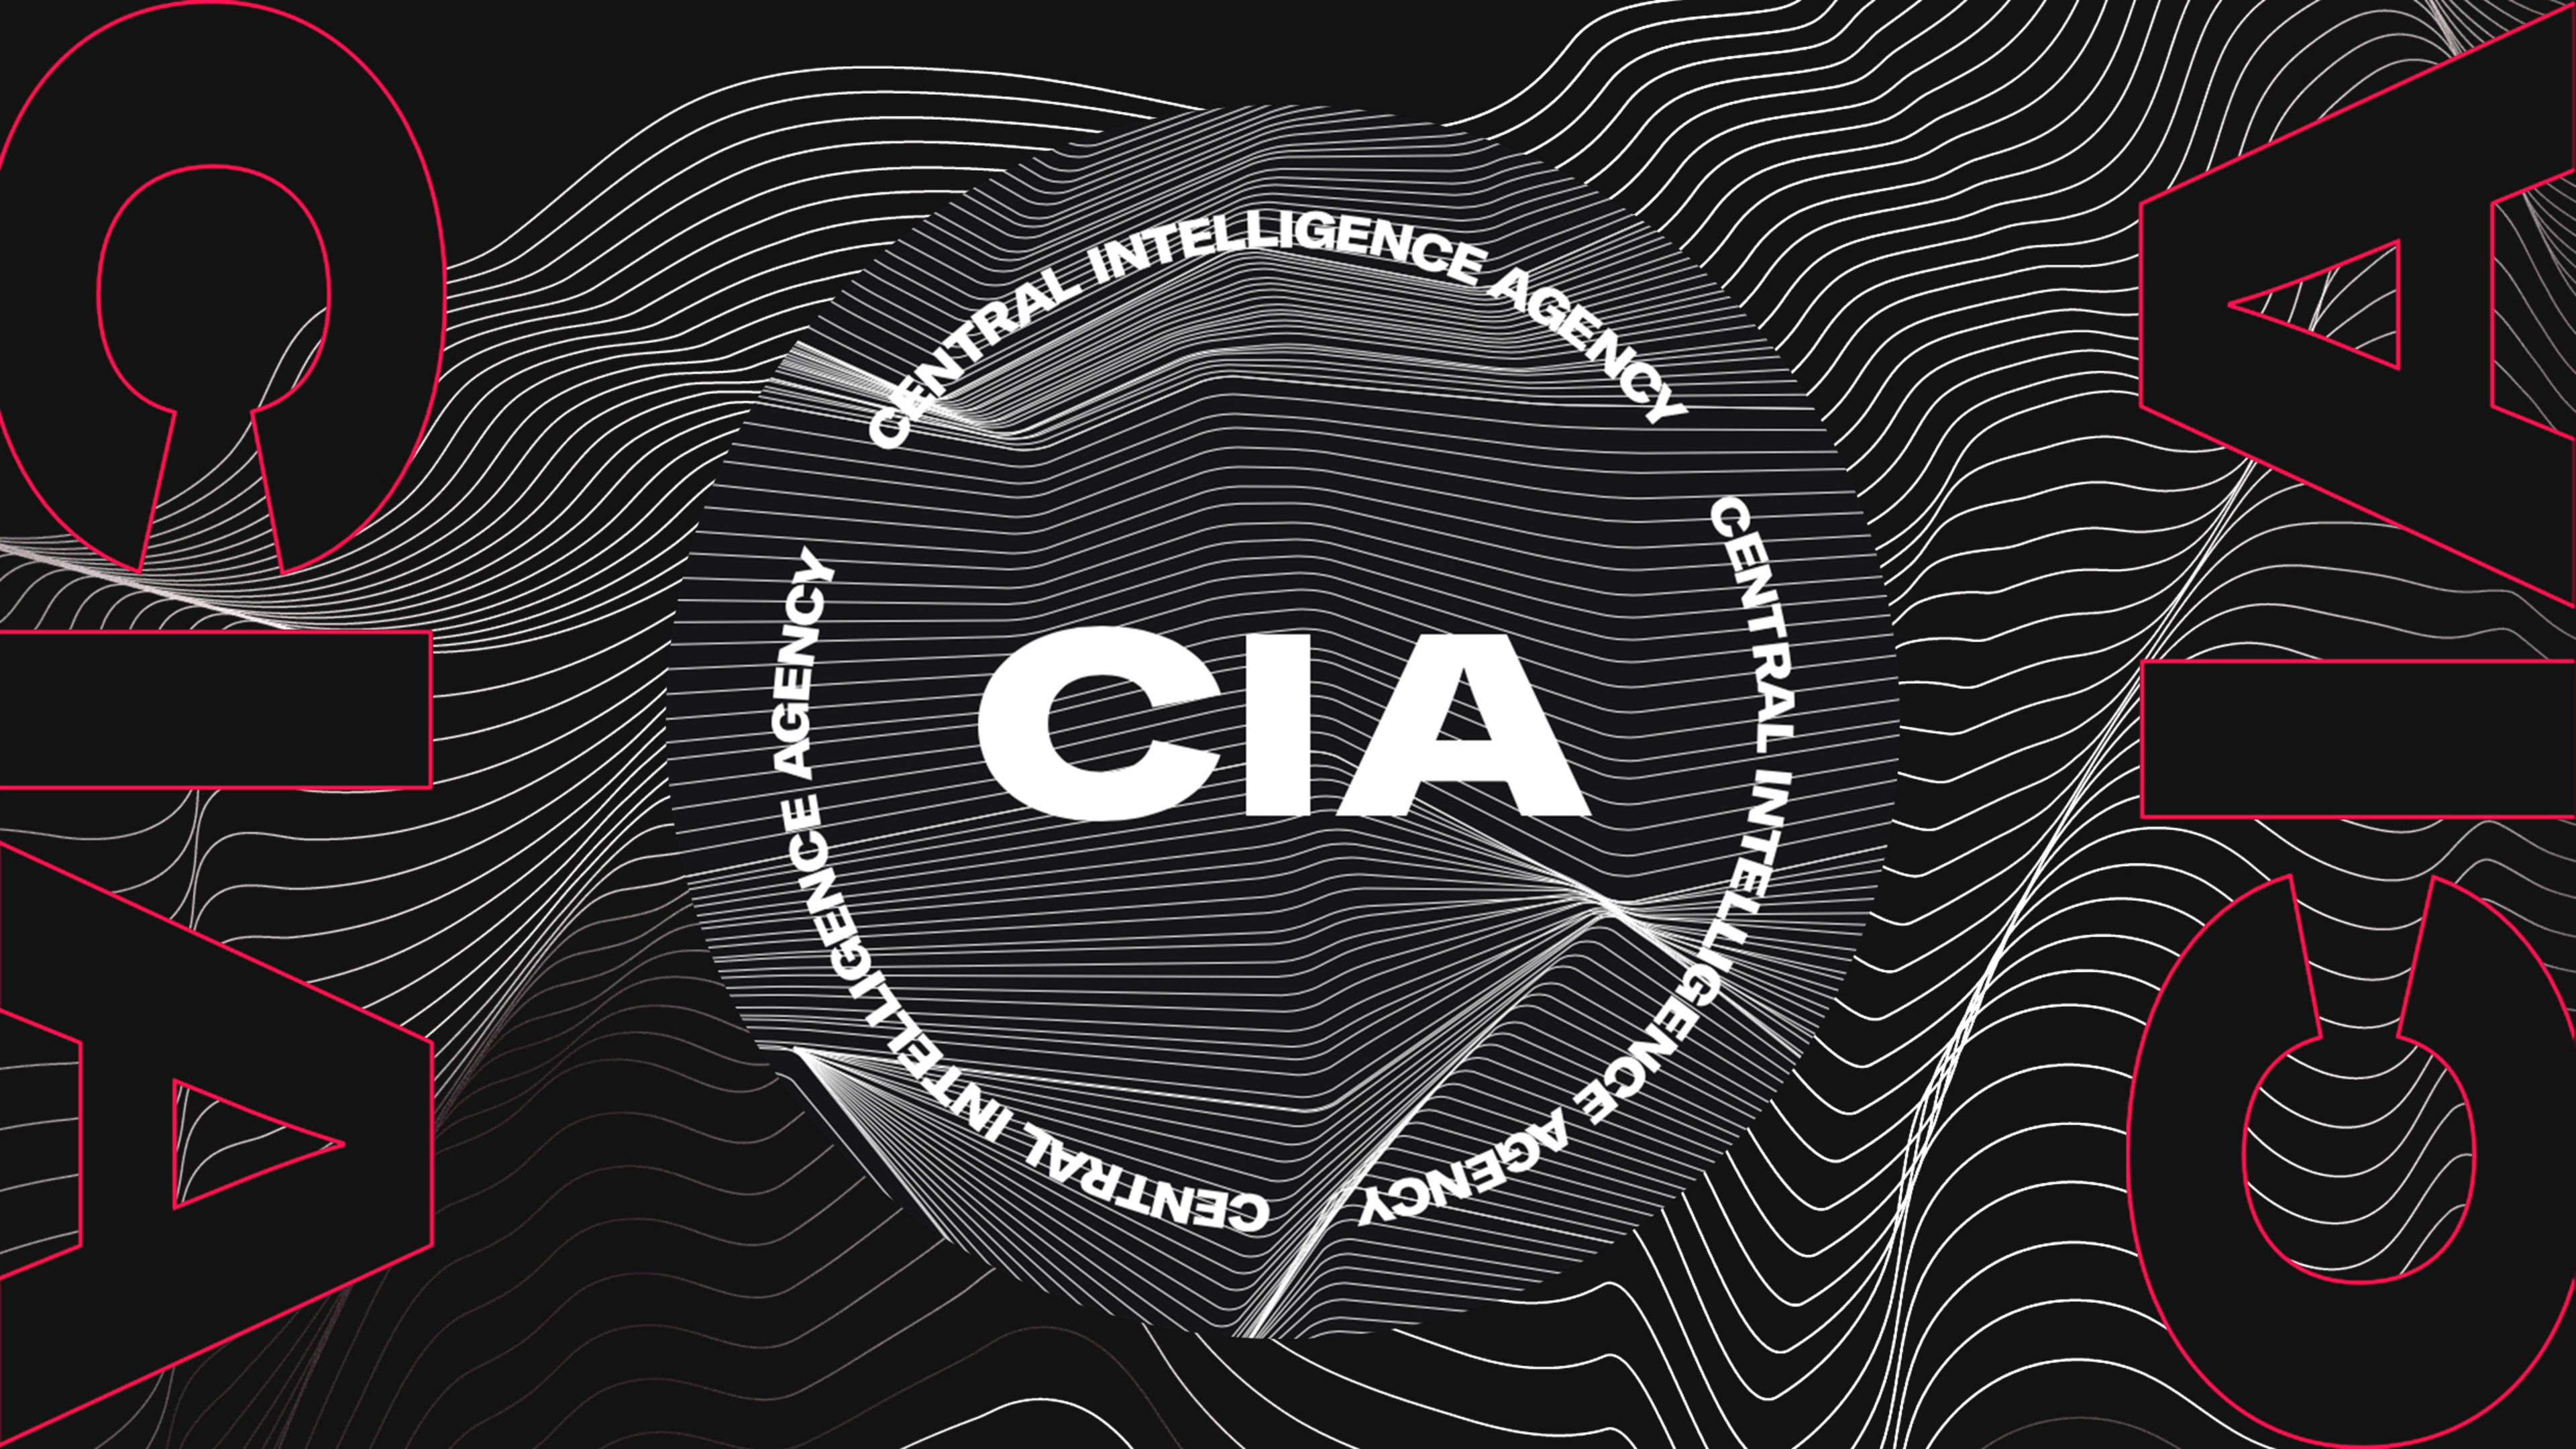 The CIA has a trendy new logo. Critics are not impressed